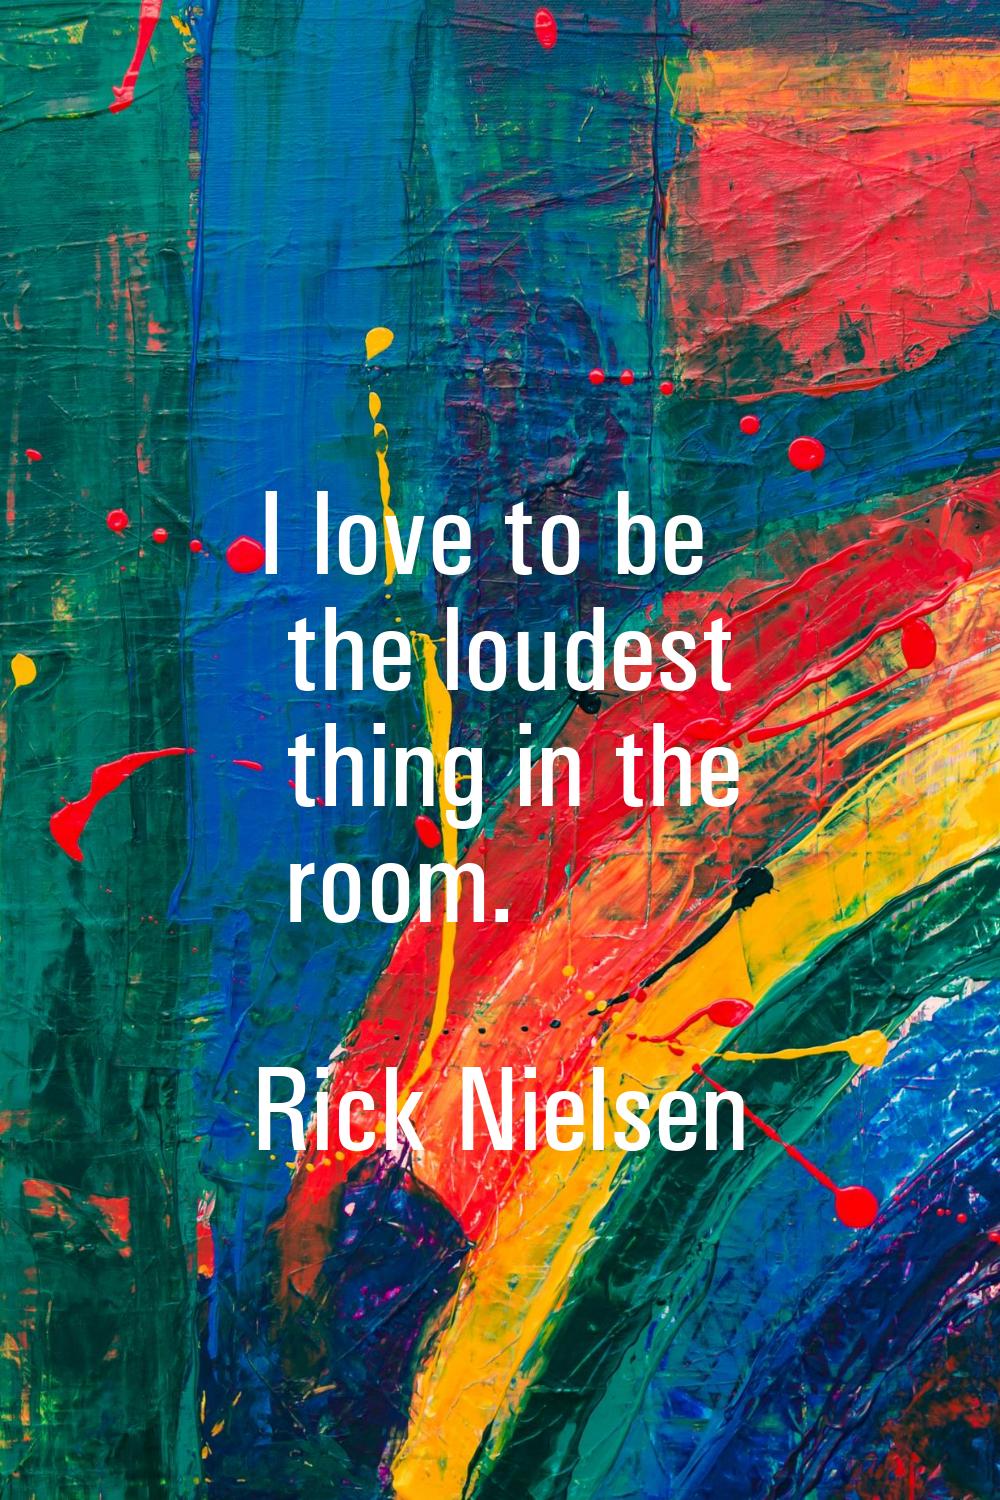 I love to be the loudest thing in the room.